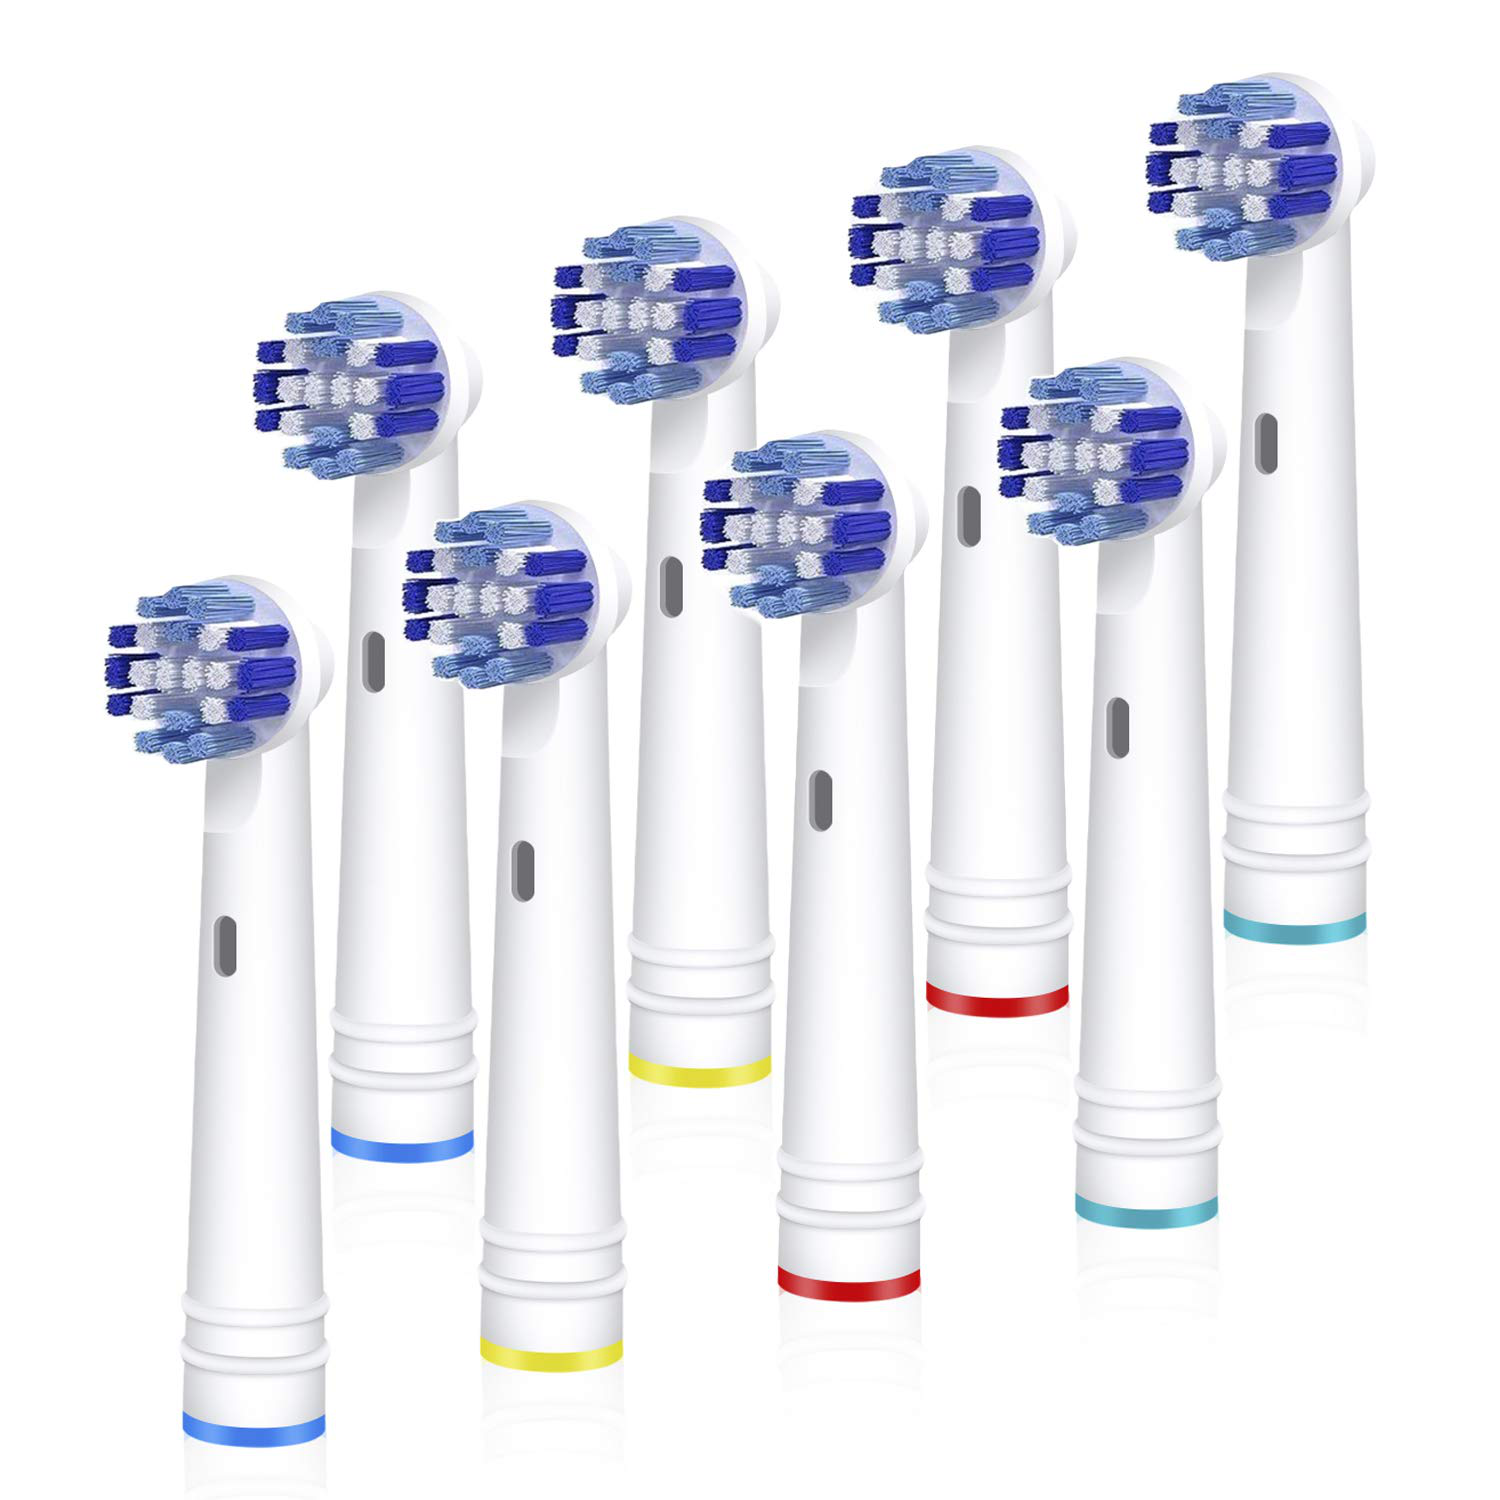 Compatible With Oral B Braun, 4 Pack Professional Electric Toothbrush Heads Brush Heads Refill for Oral-B 7000/Pro 1000/9600/ 500/3000/8000